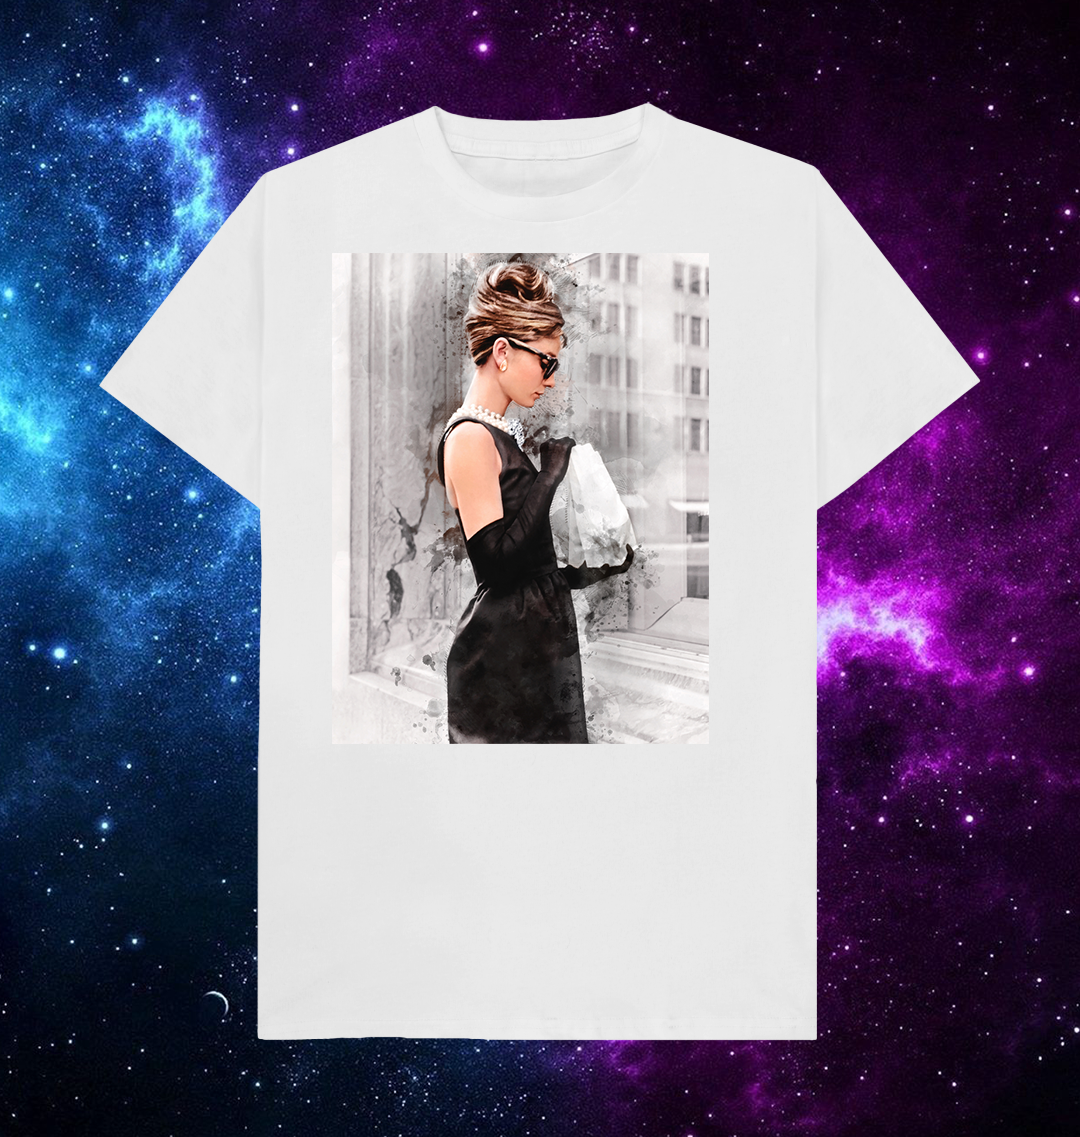 Audrey Hepburn Profile in Watercolor by TinselTown Limited Artist T-Shirt